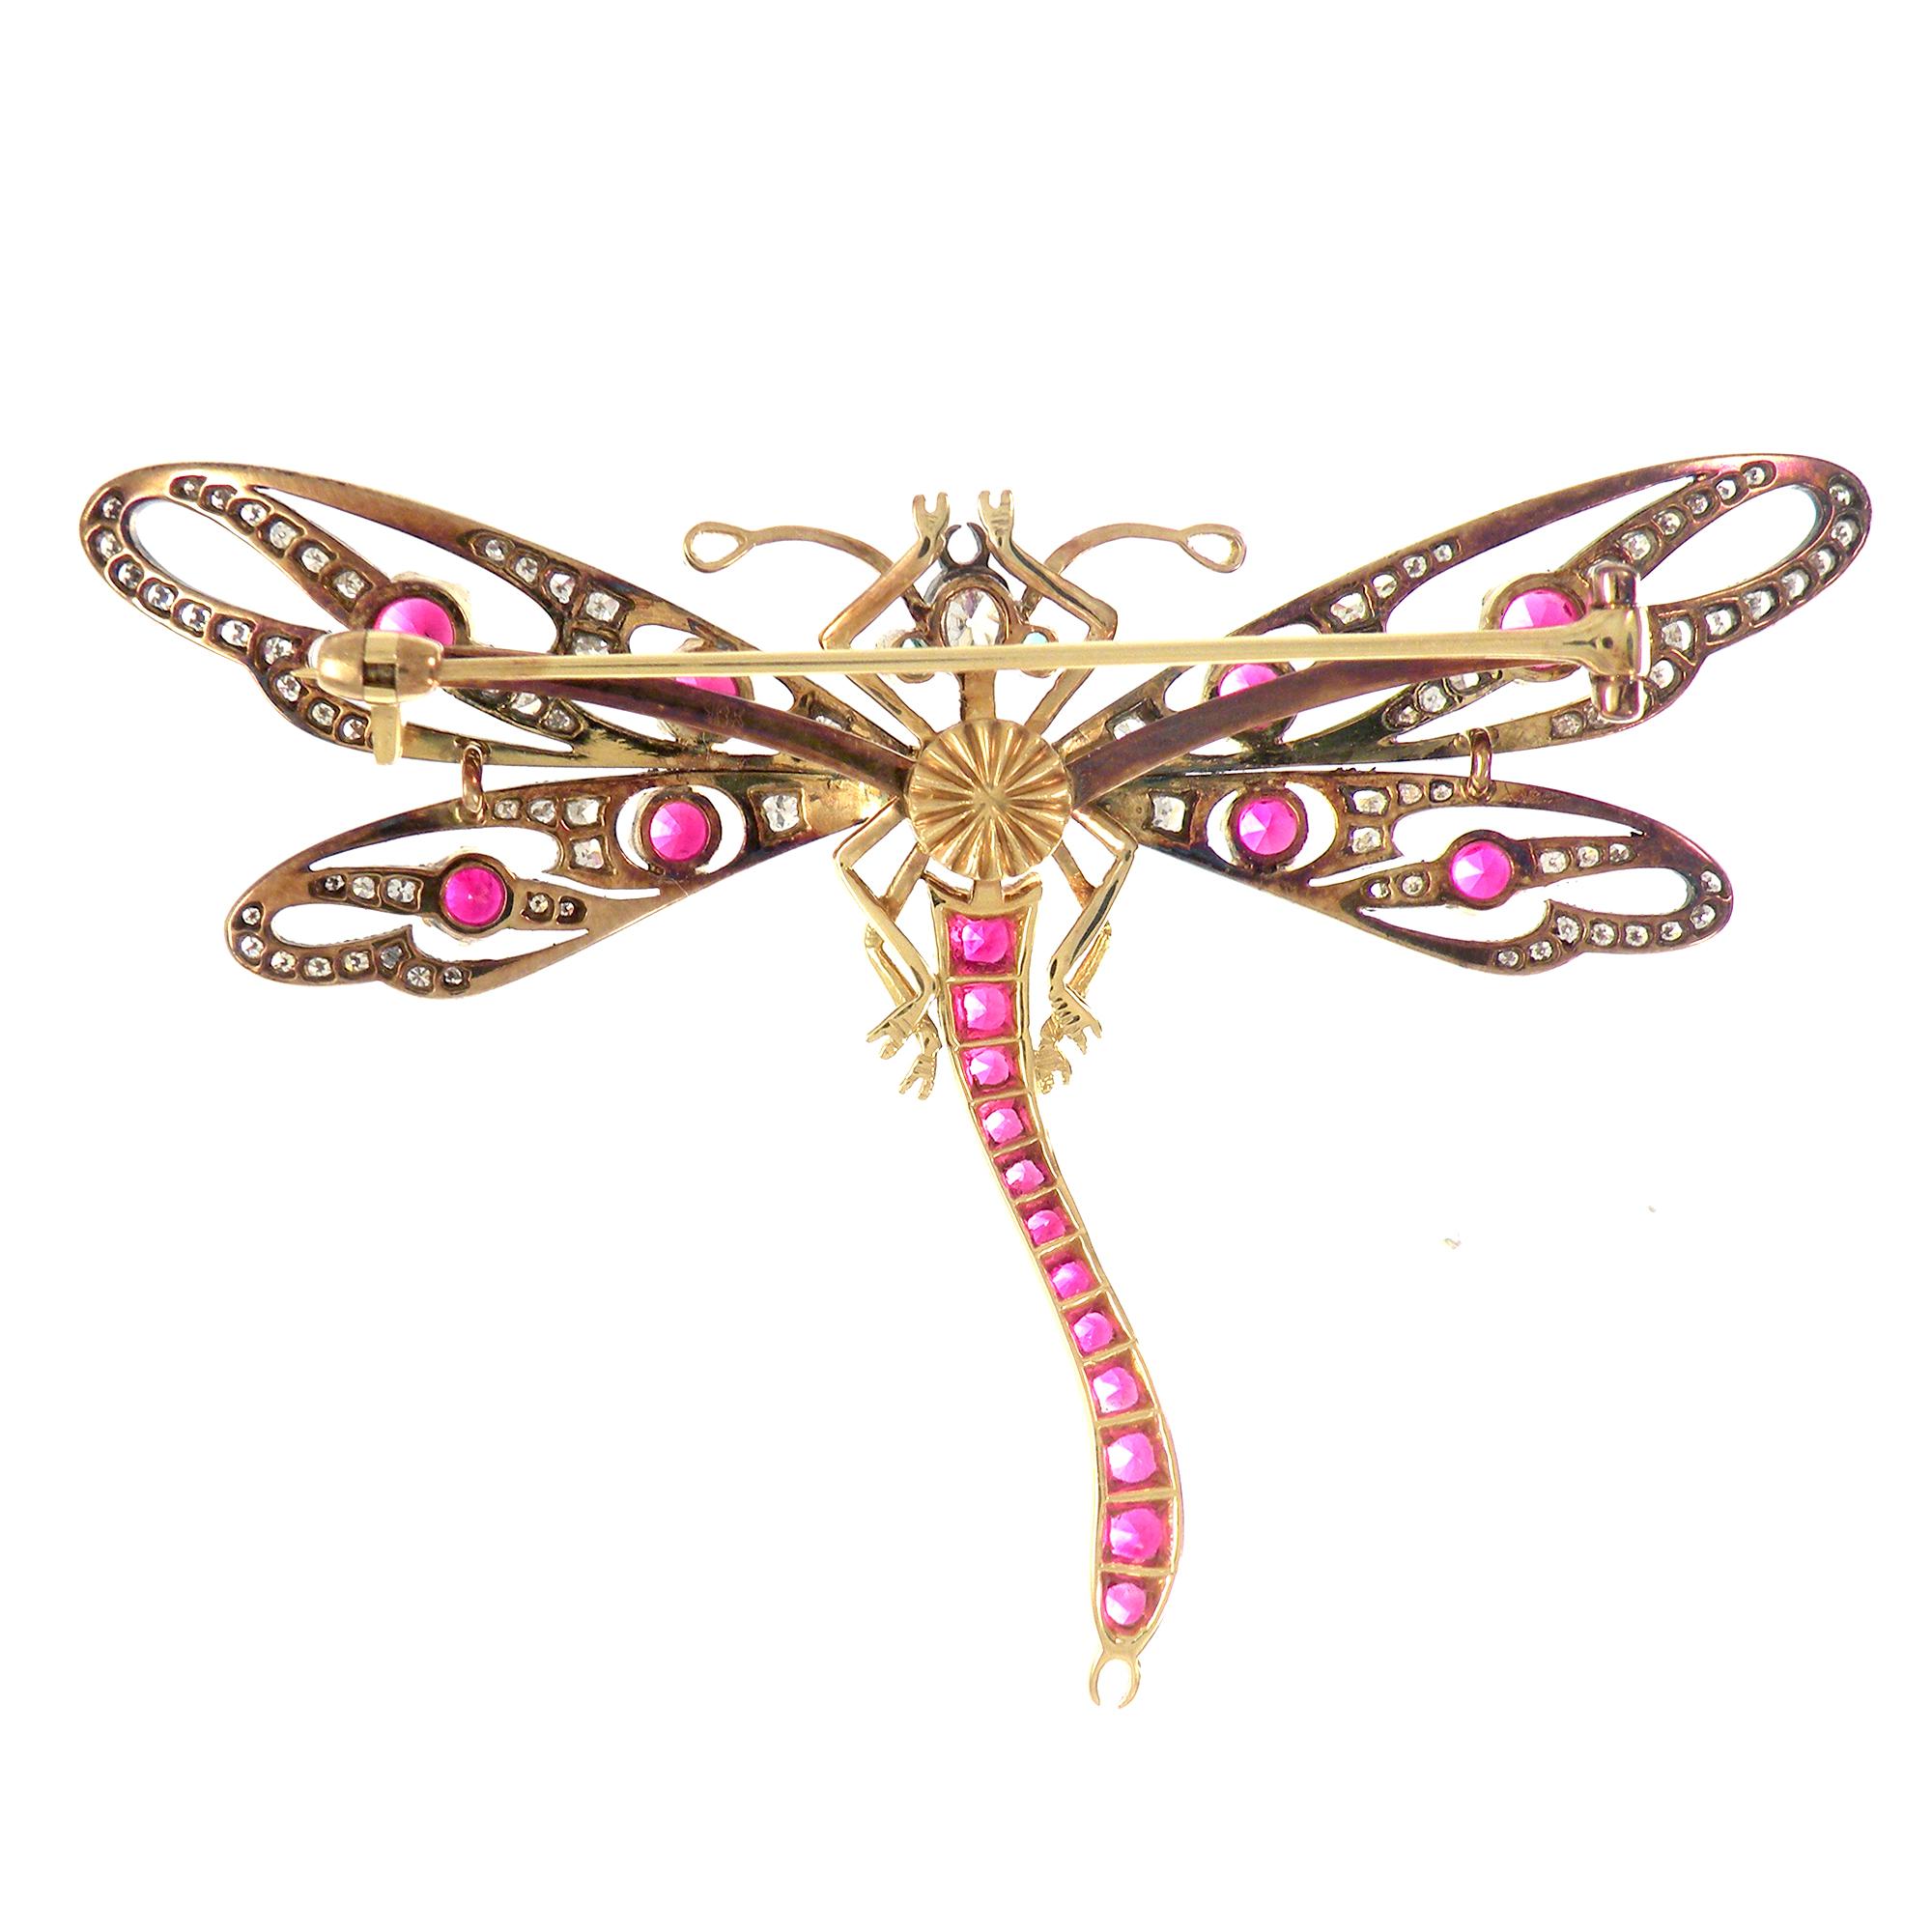 This beautiful Victorian inspired dragonfly brooch is handcrafted in 18k yellow gold and silver. The body and wings set with old cut diamonds and full cut diamonds (Total diamonds carat is 0.72 carats) and circular-cut rubies, the abdomen with